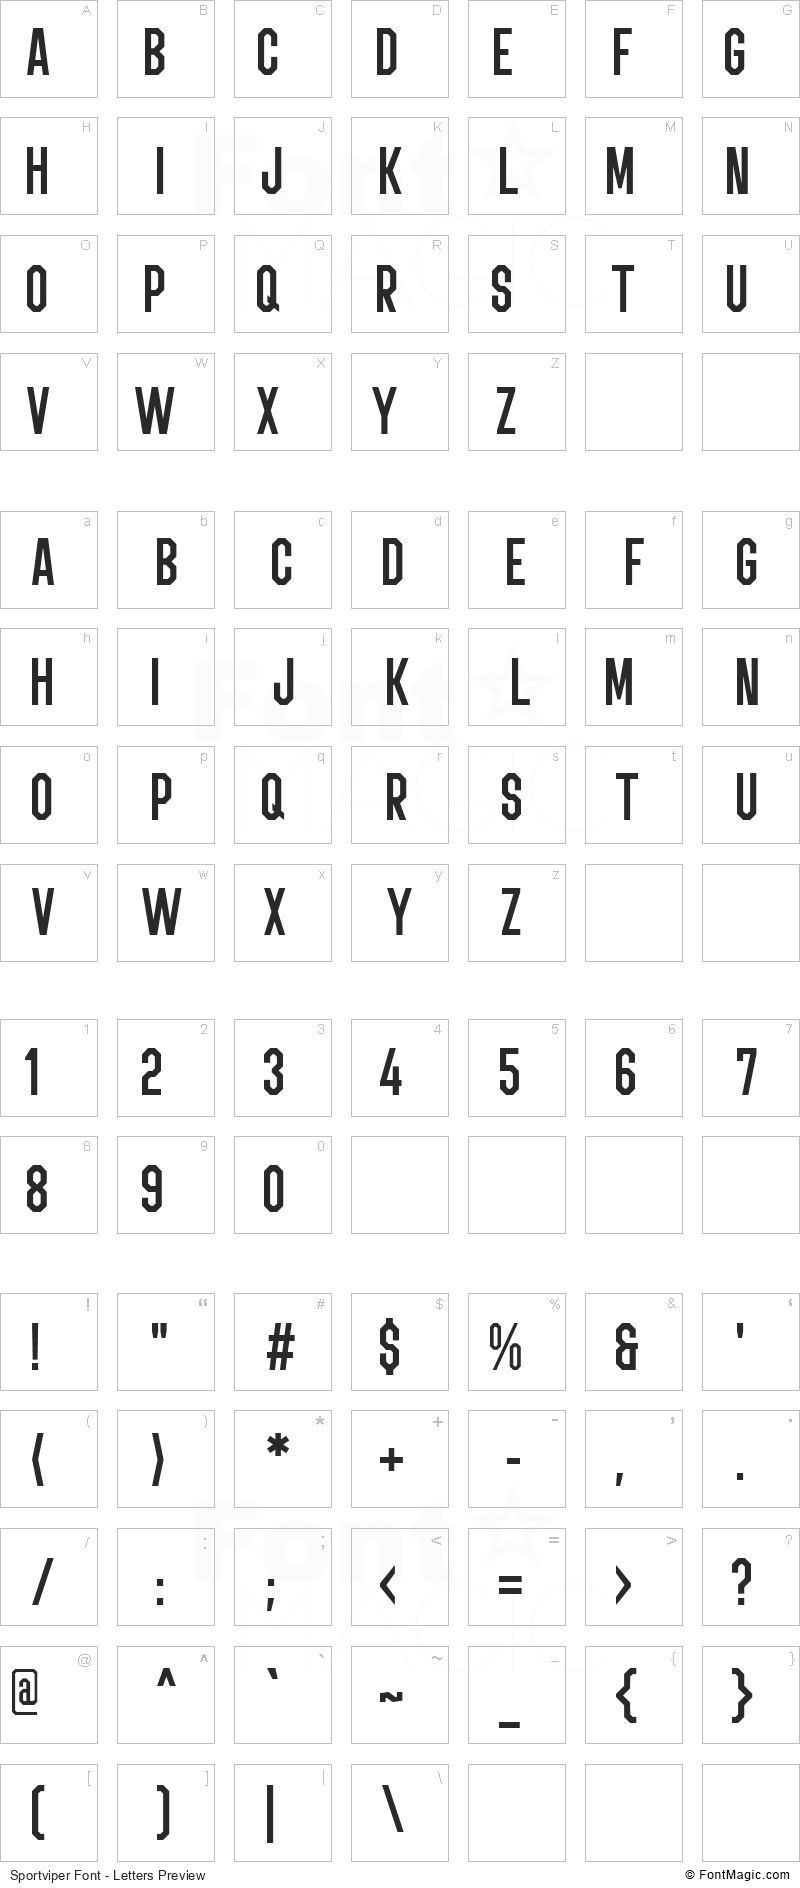 Sportviper Font - All Latters Preview Chart